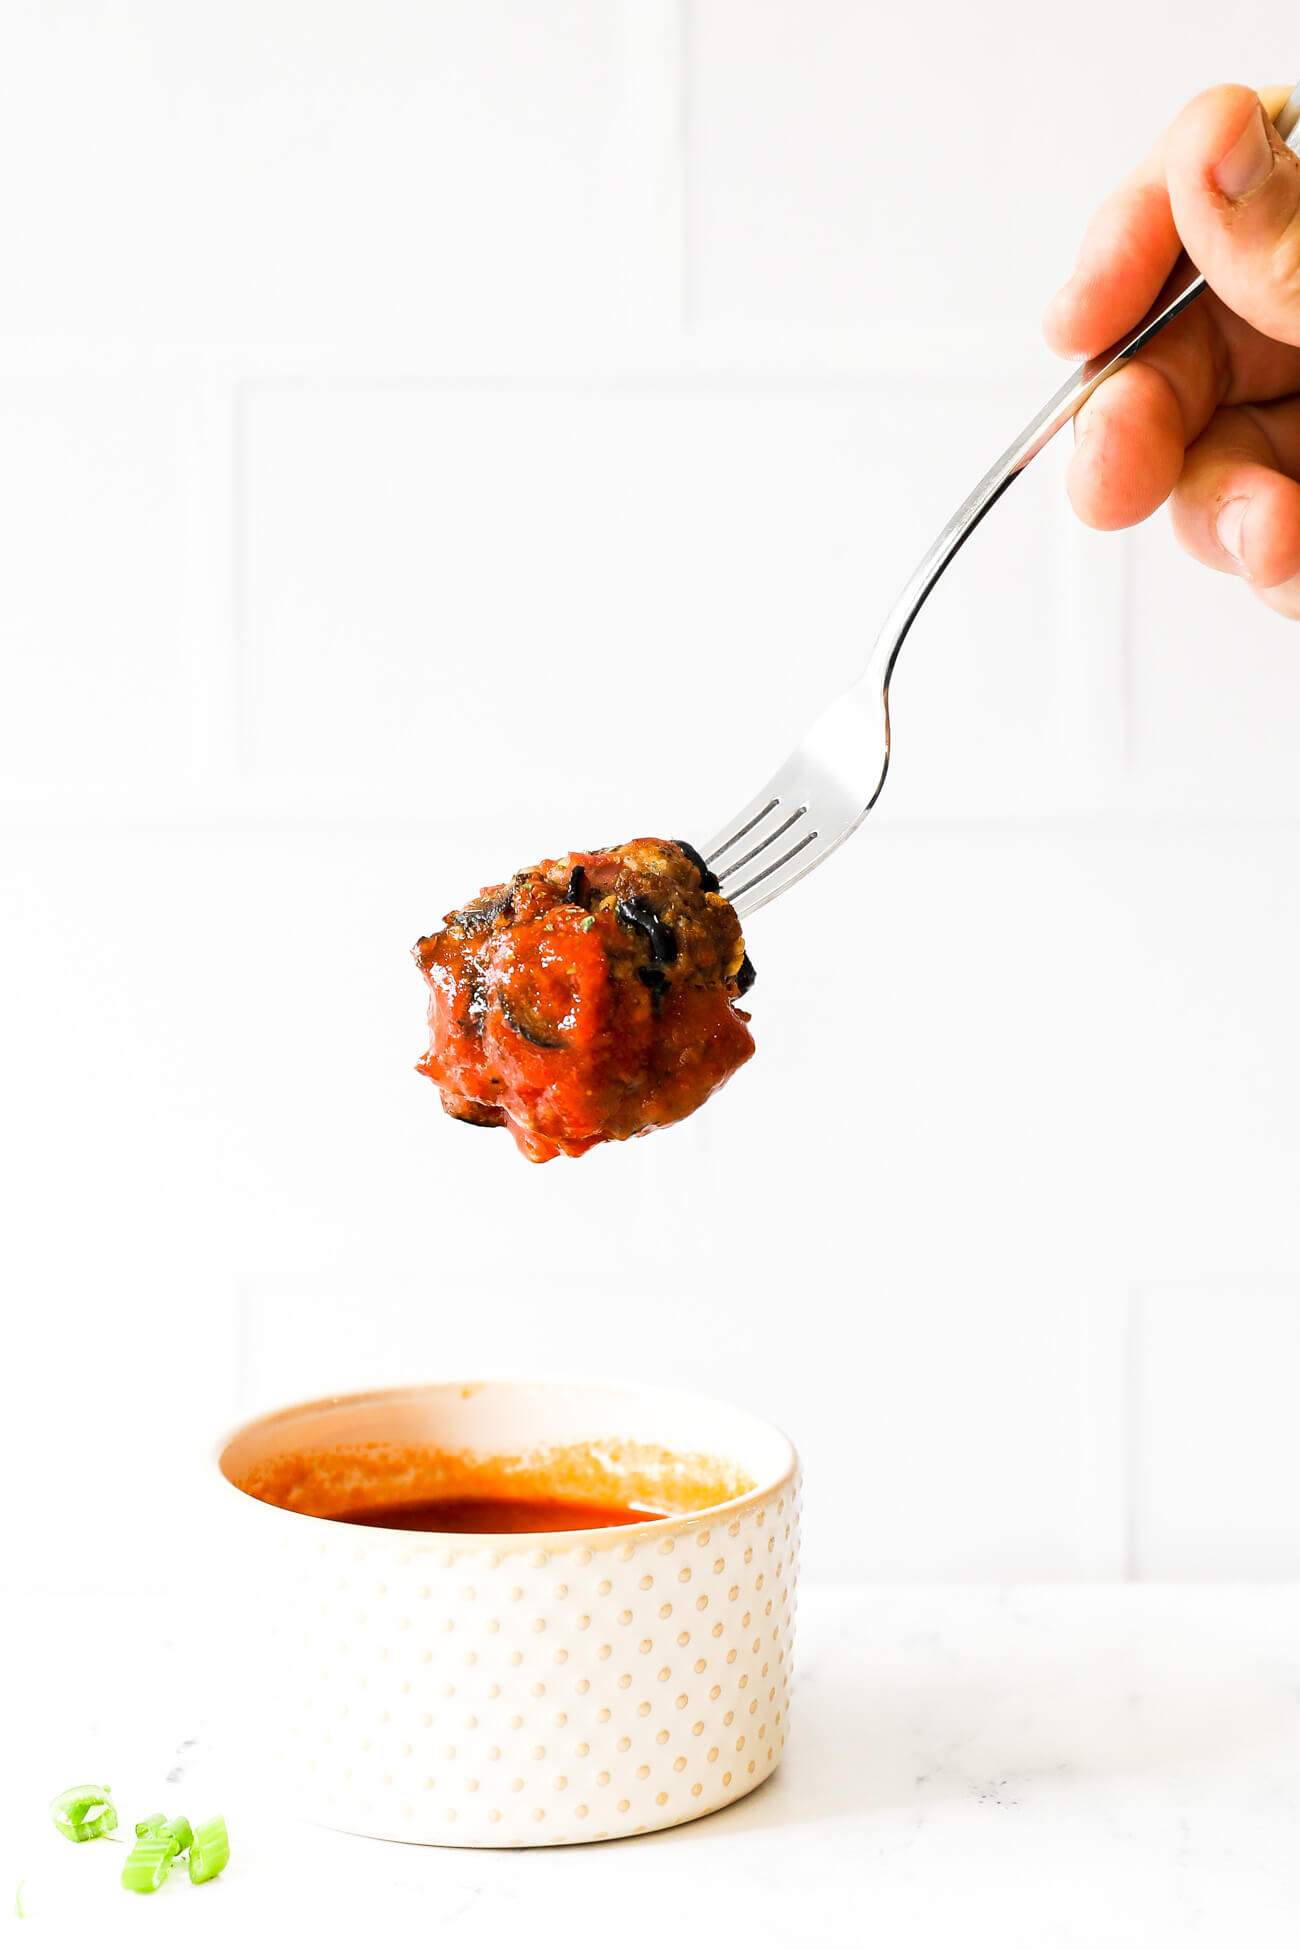 One pizza meatball on a fork being dipped into a ramekin of marinara sauce.